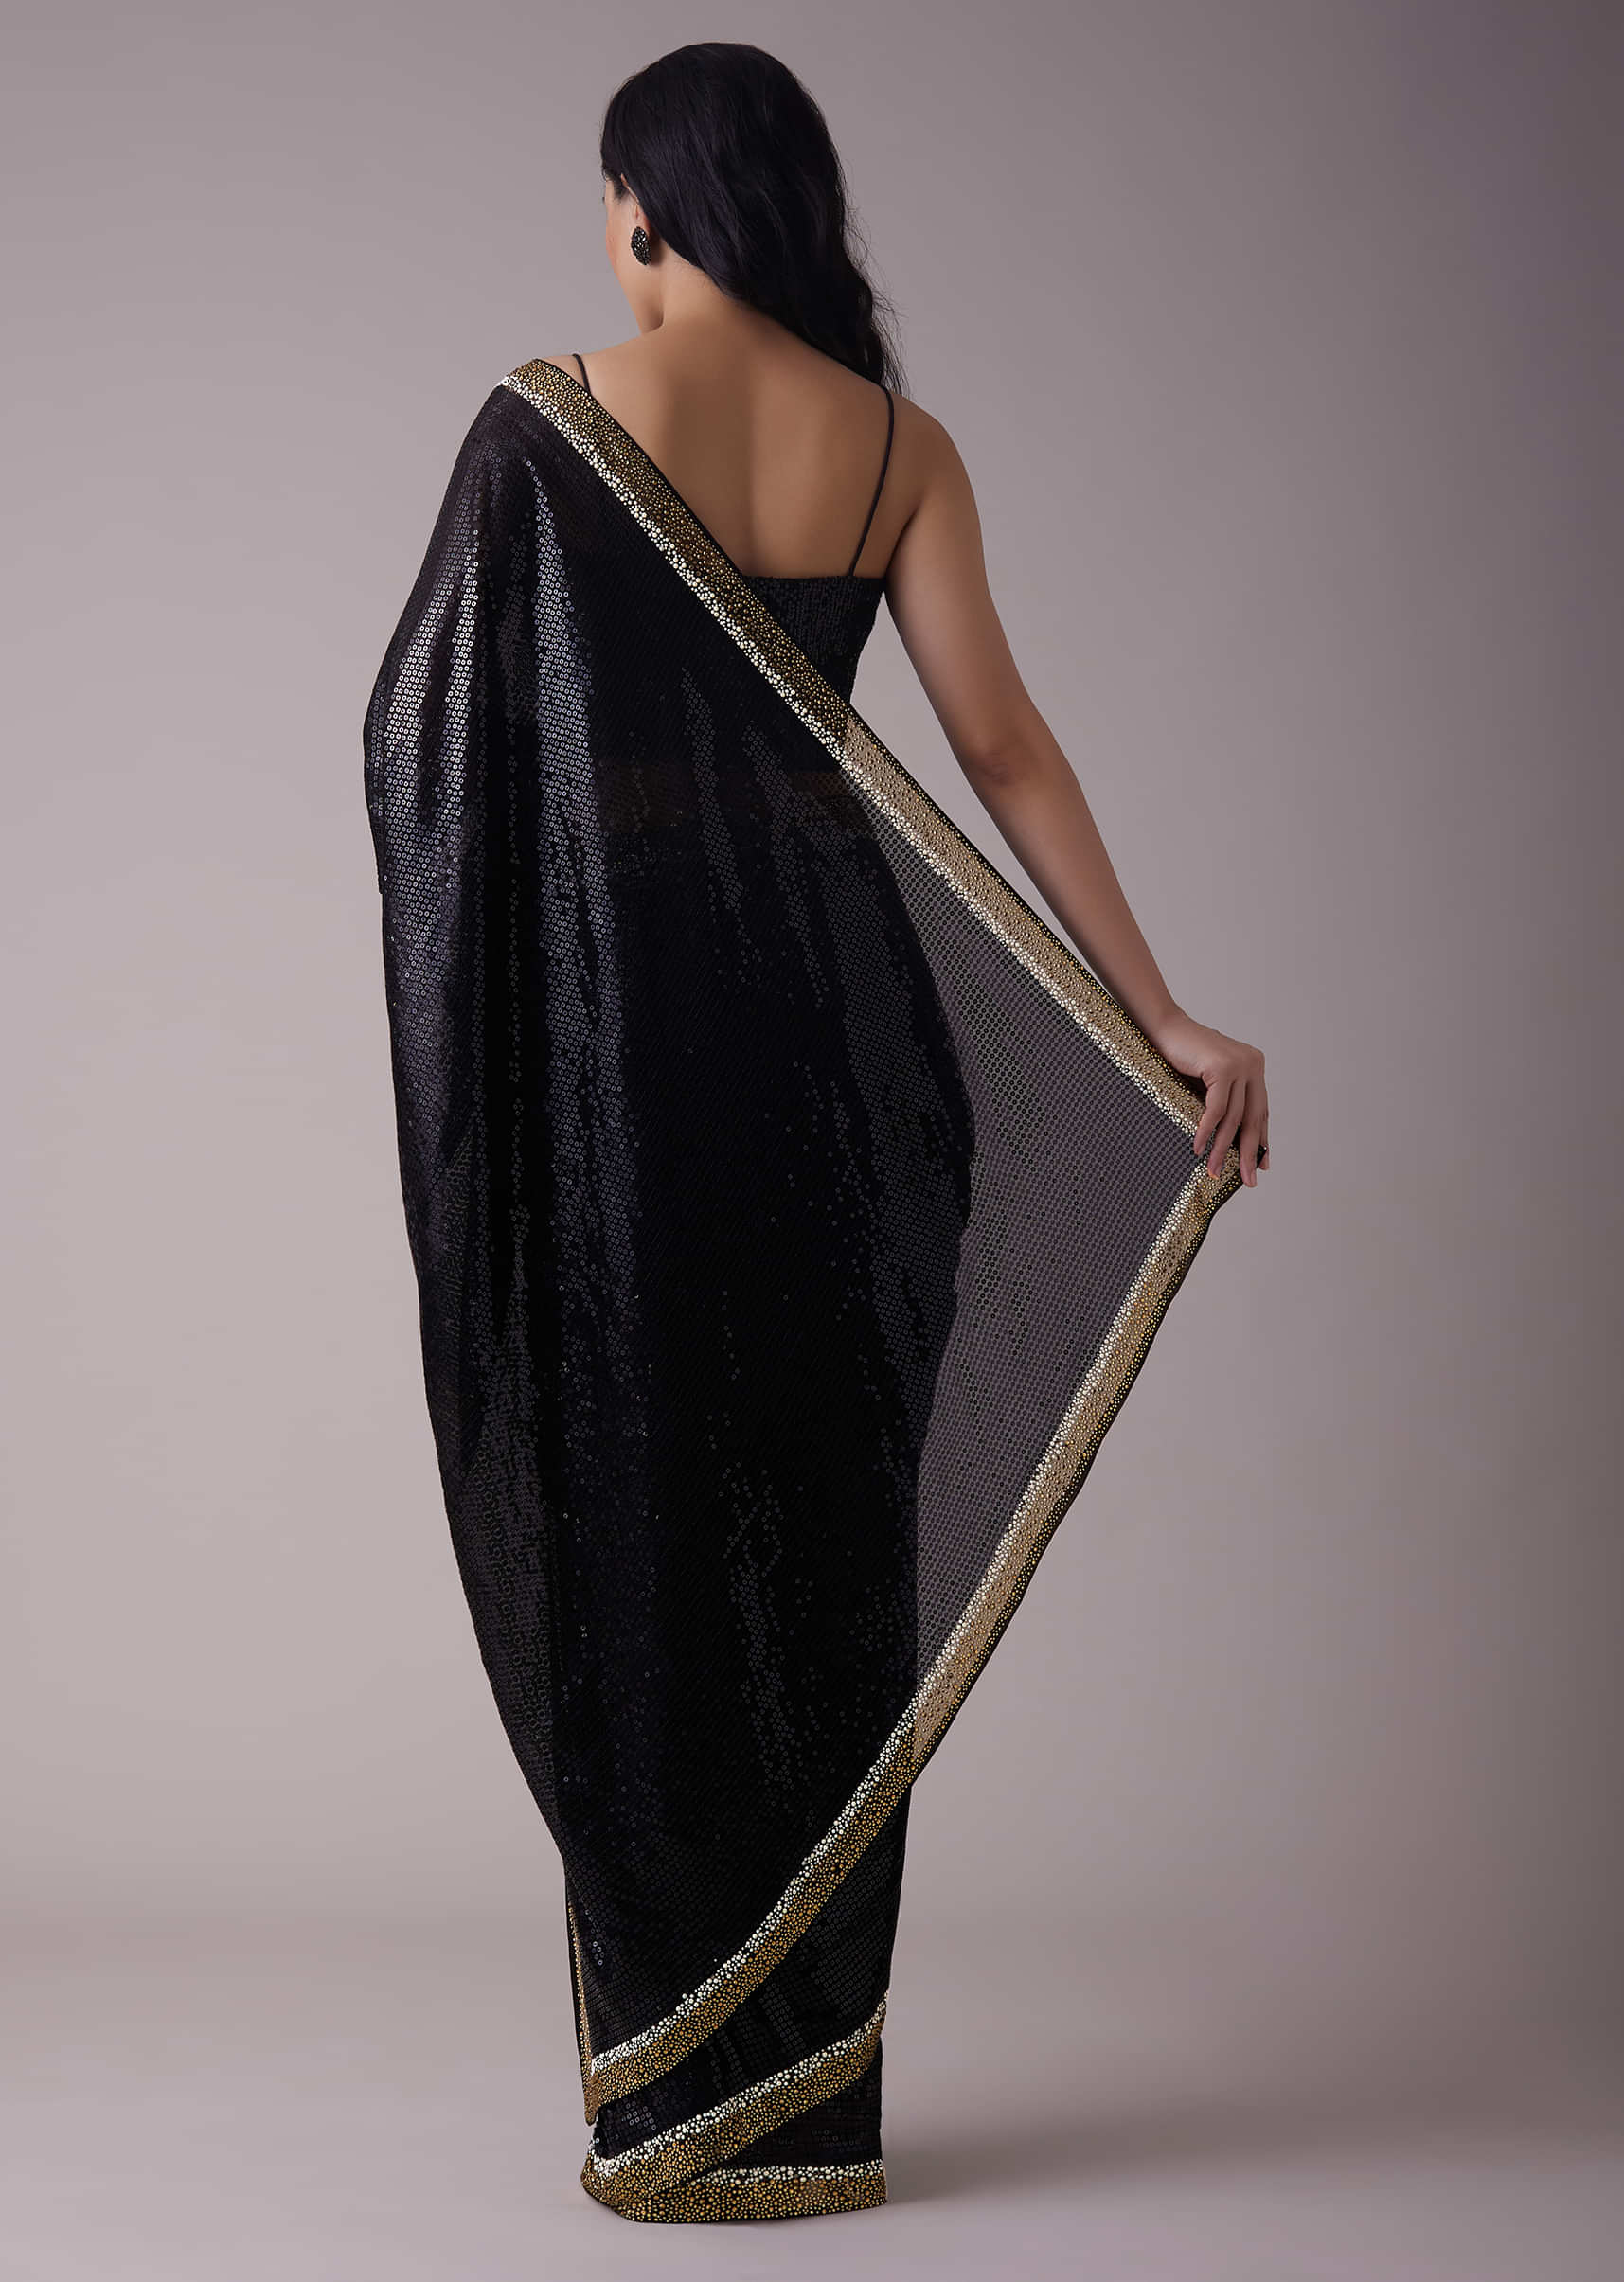 Black Sequins Saree With An Embellished Border